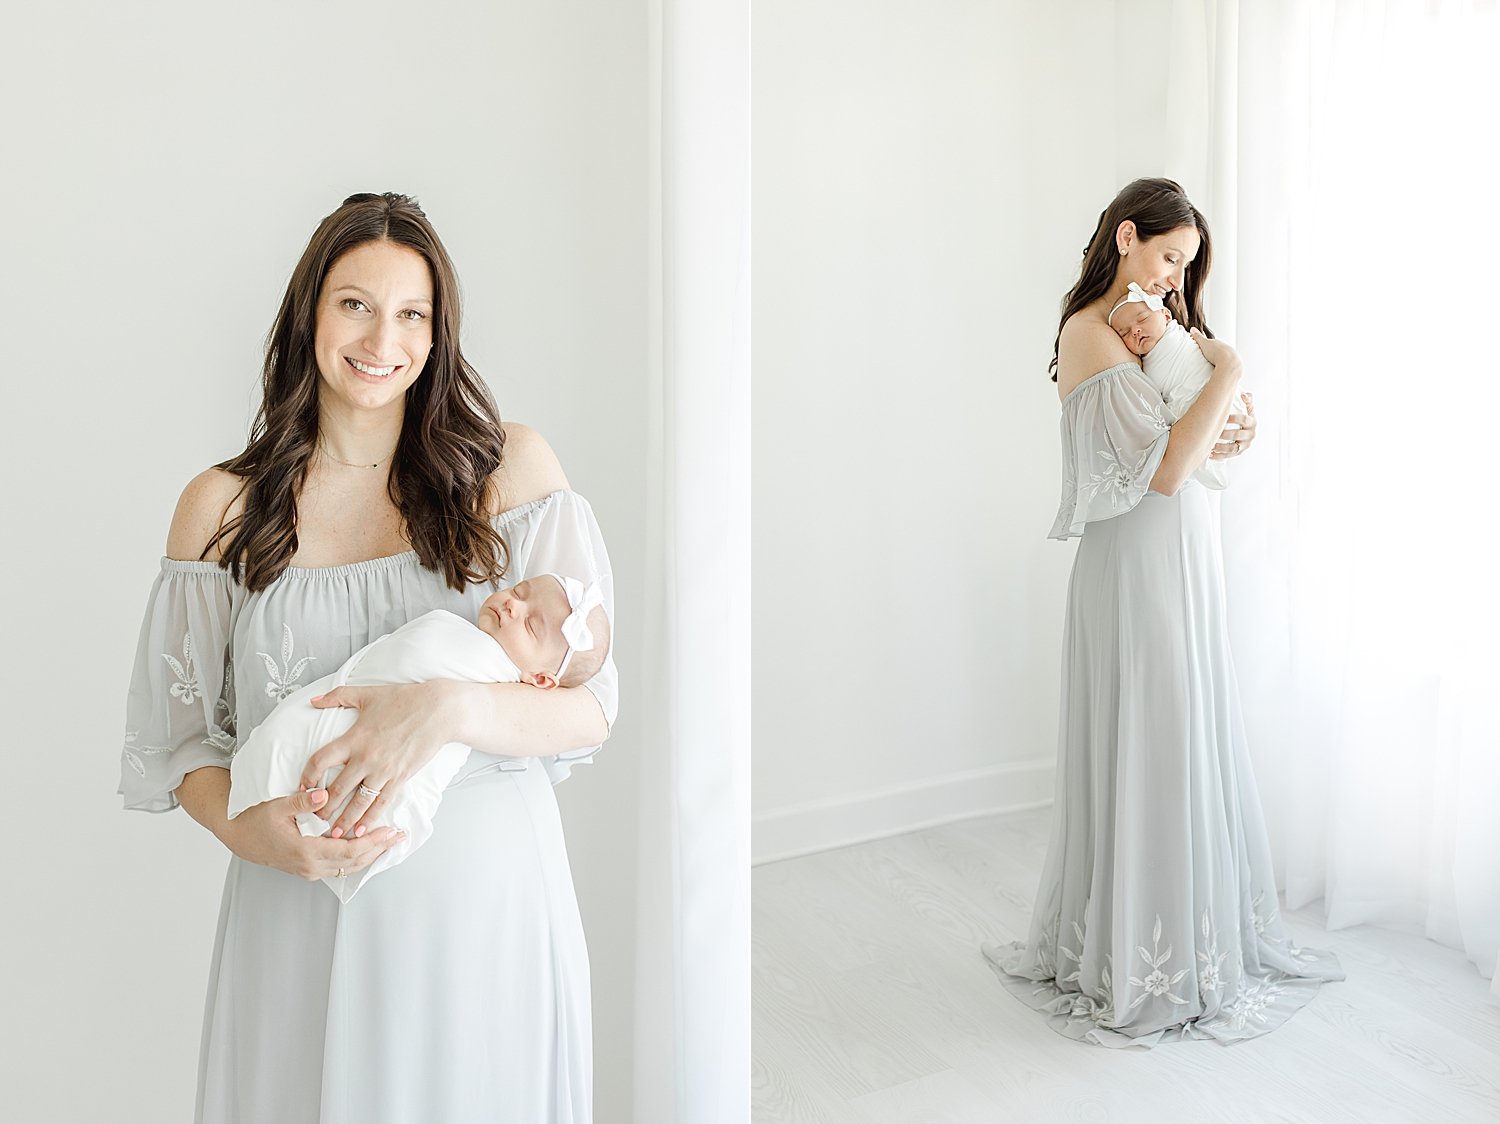 Mom holding her baby girl for newborn photos | Kristin Wood Photography